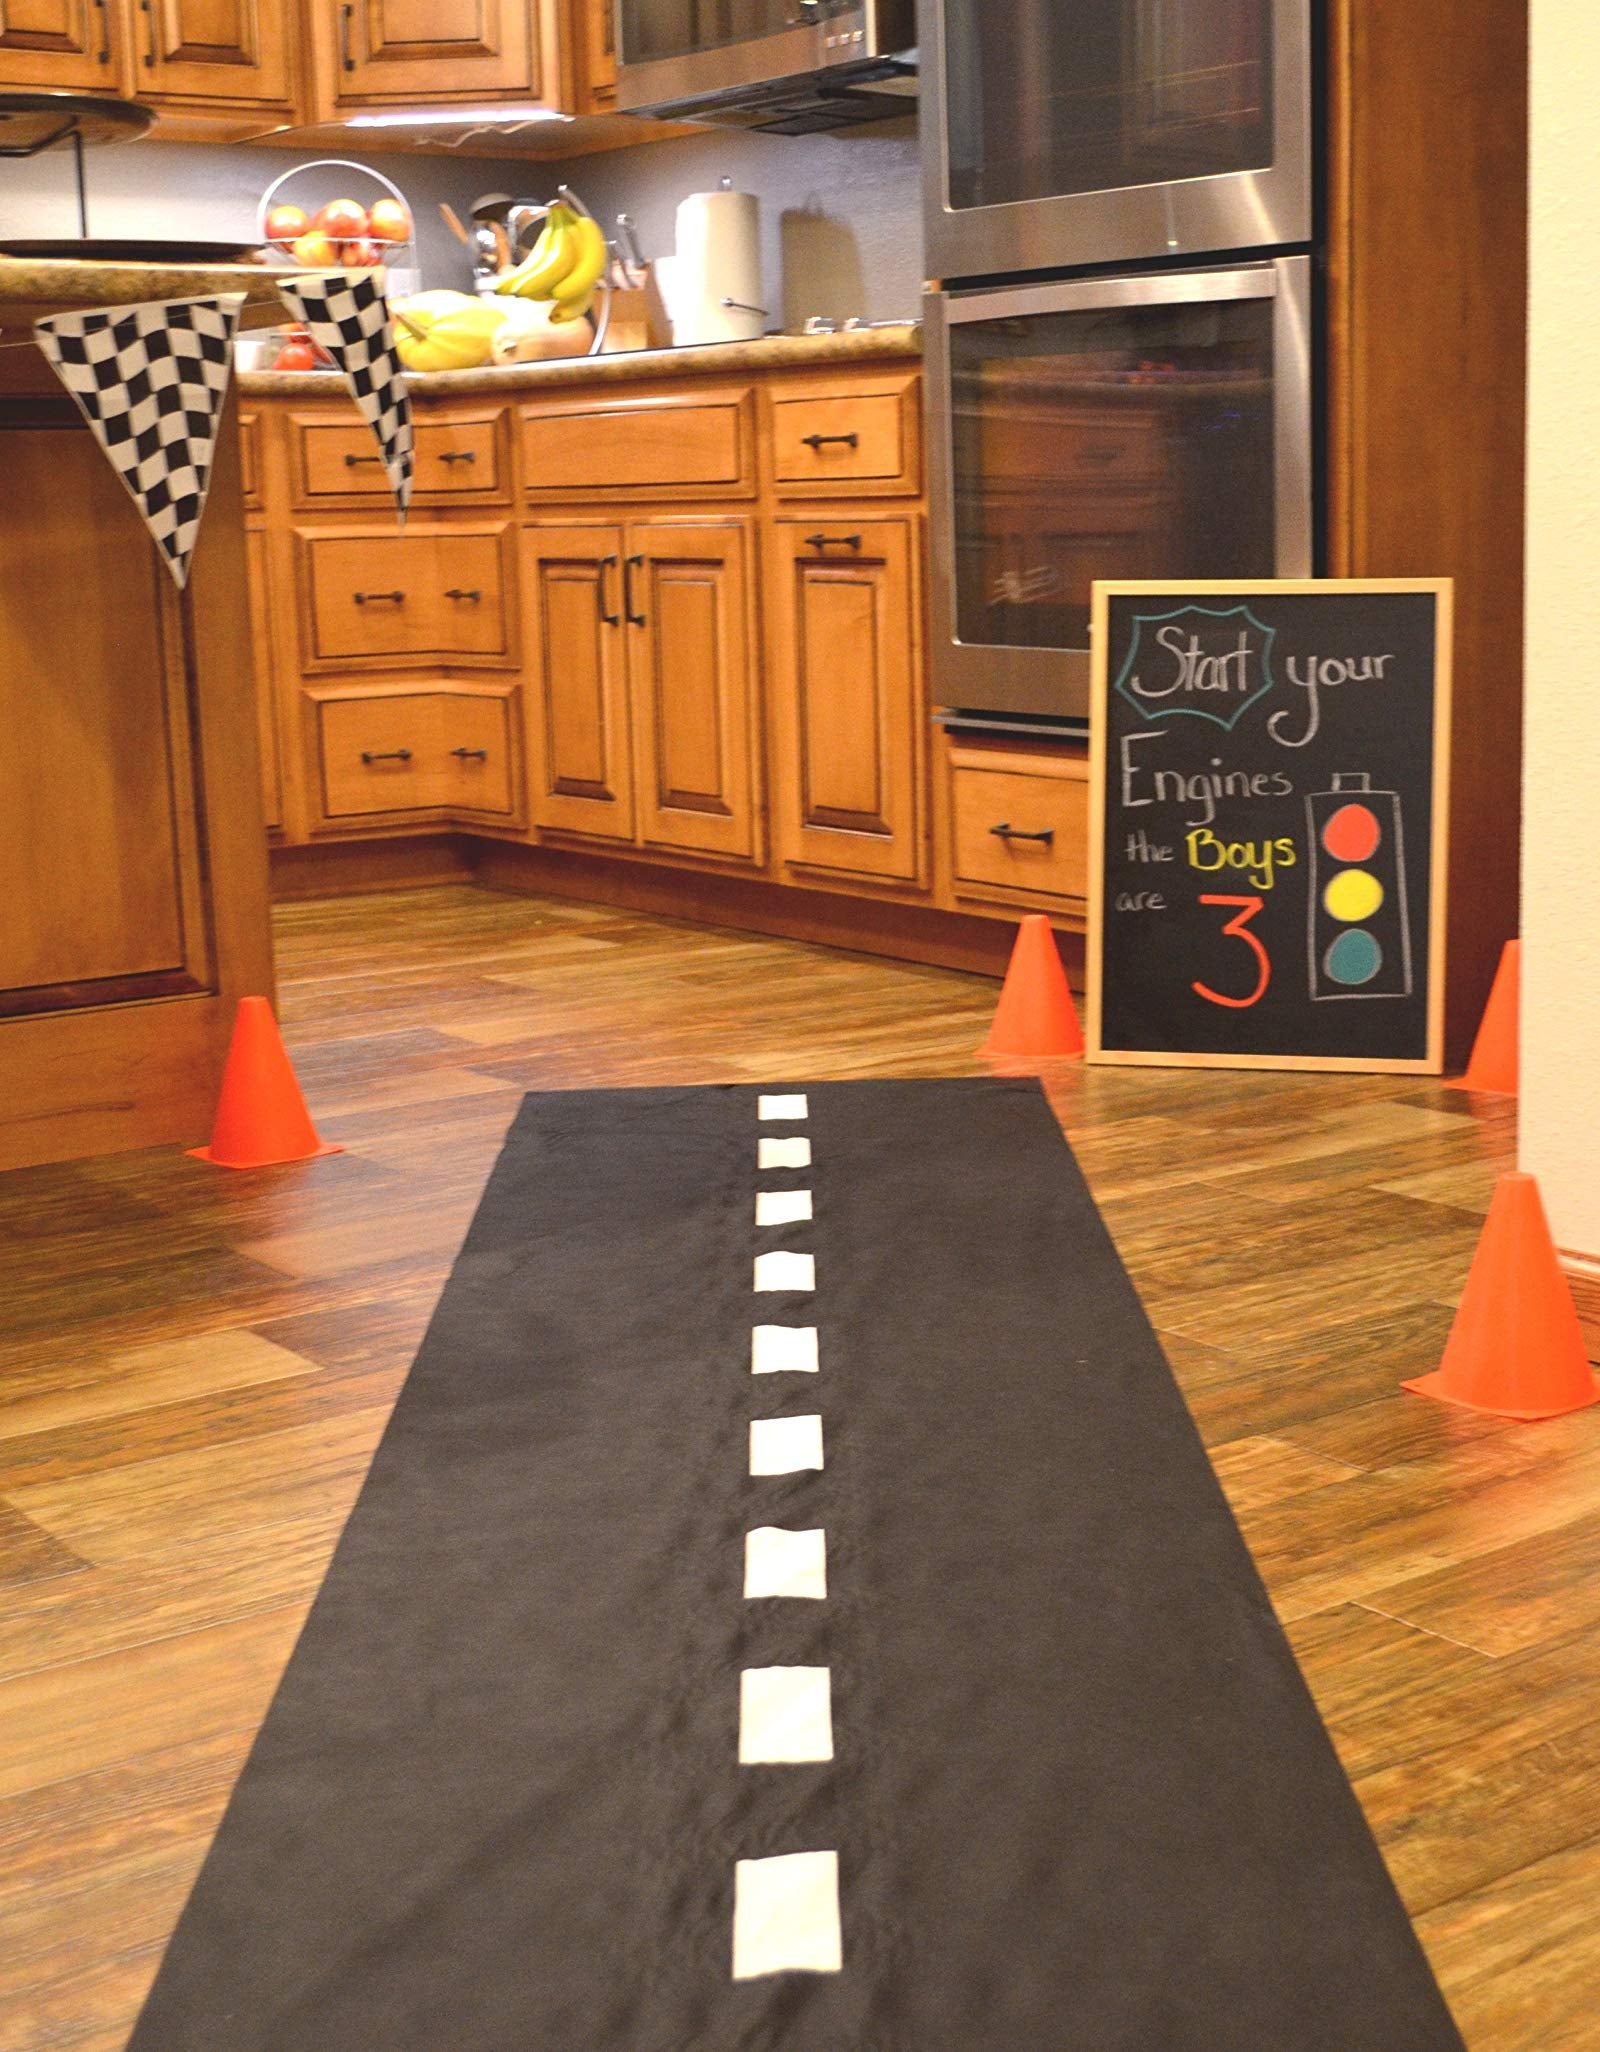 10ft Long Racetrack Floor Running Racer Party Decoration Mat Drag Race Car Road Go Kart Theme Birthday Games (2ft Wide) by Super Z Outlet